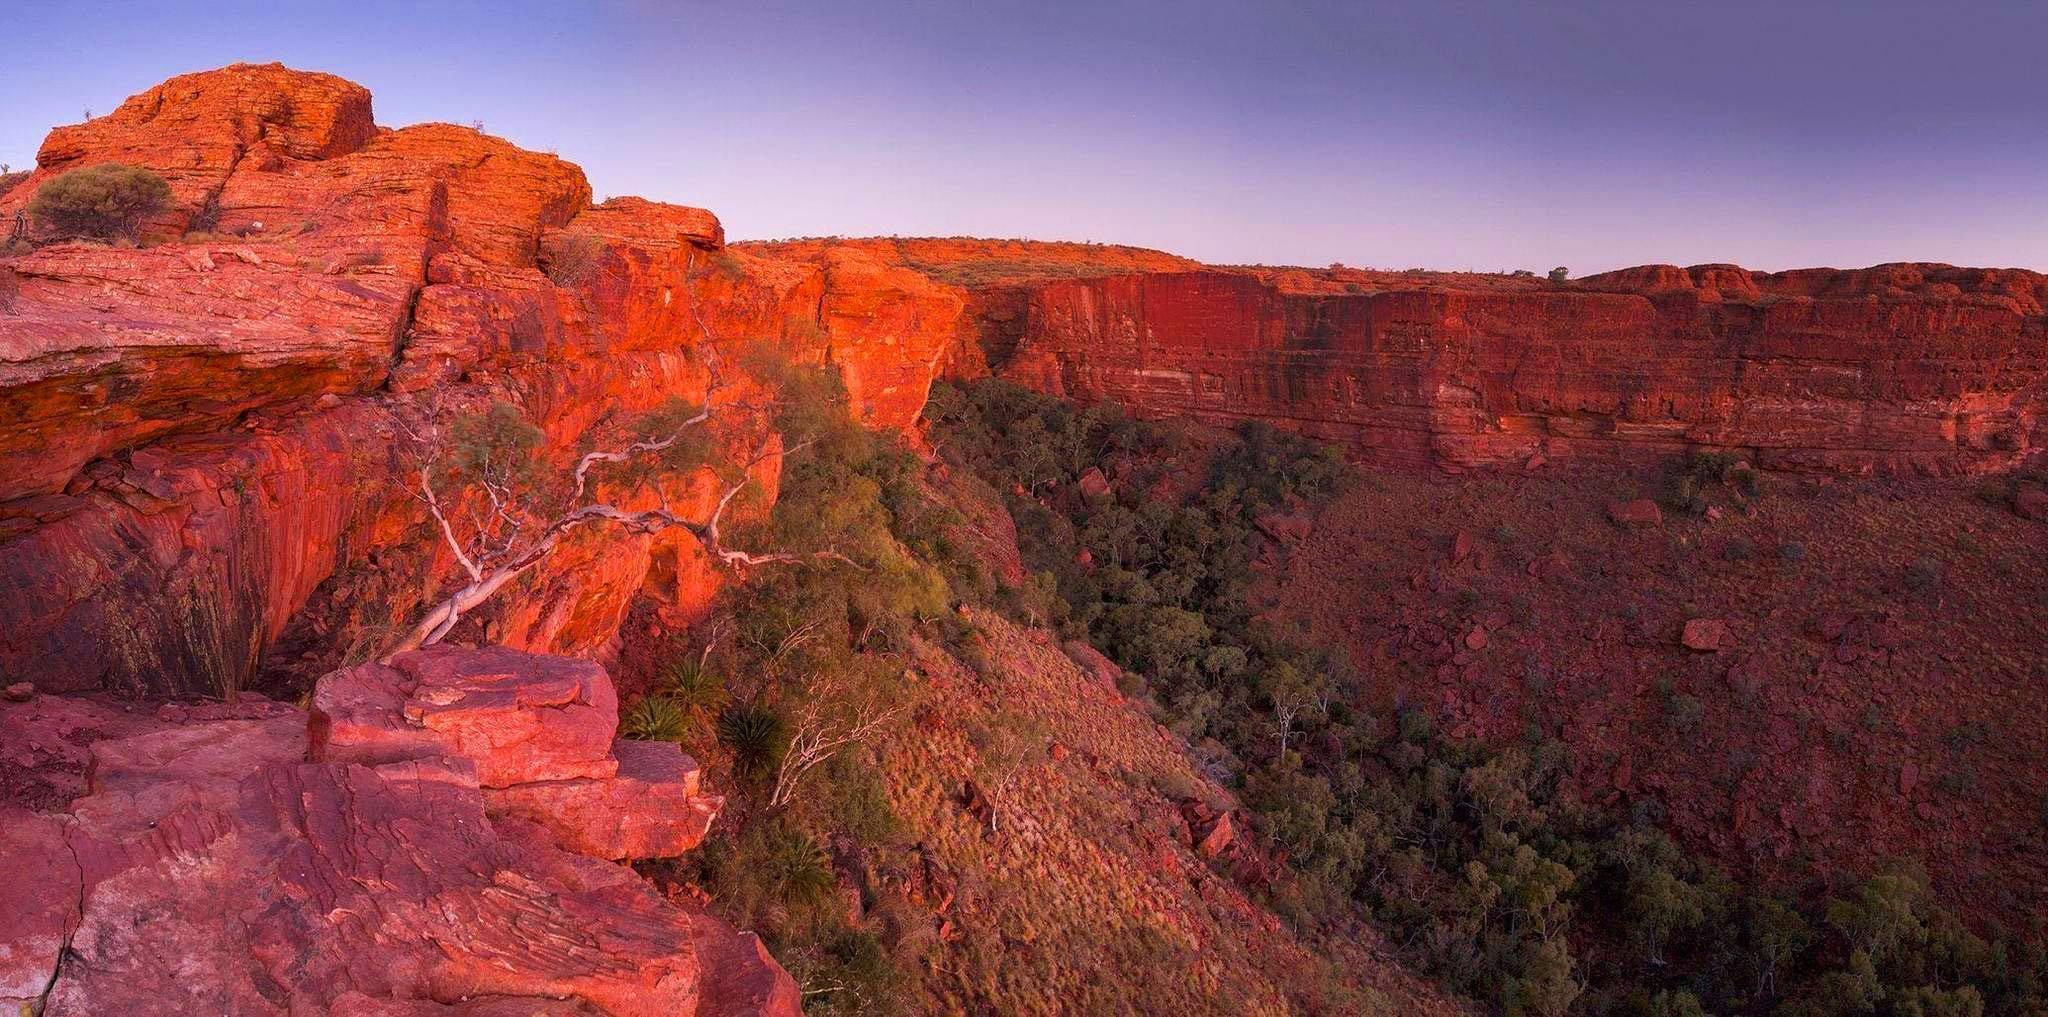 A deep greenery area surrounded by heavy mountain walls, Kings Canyon Sunset - Northern Territory